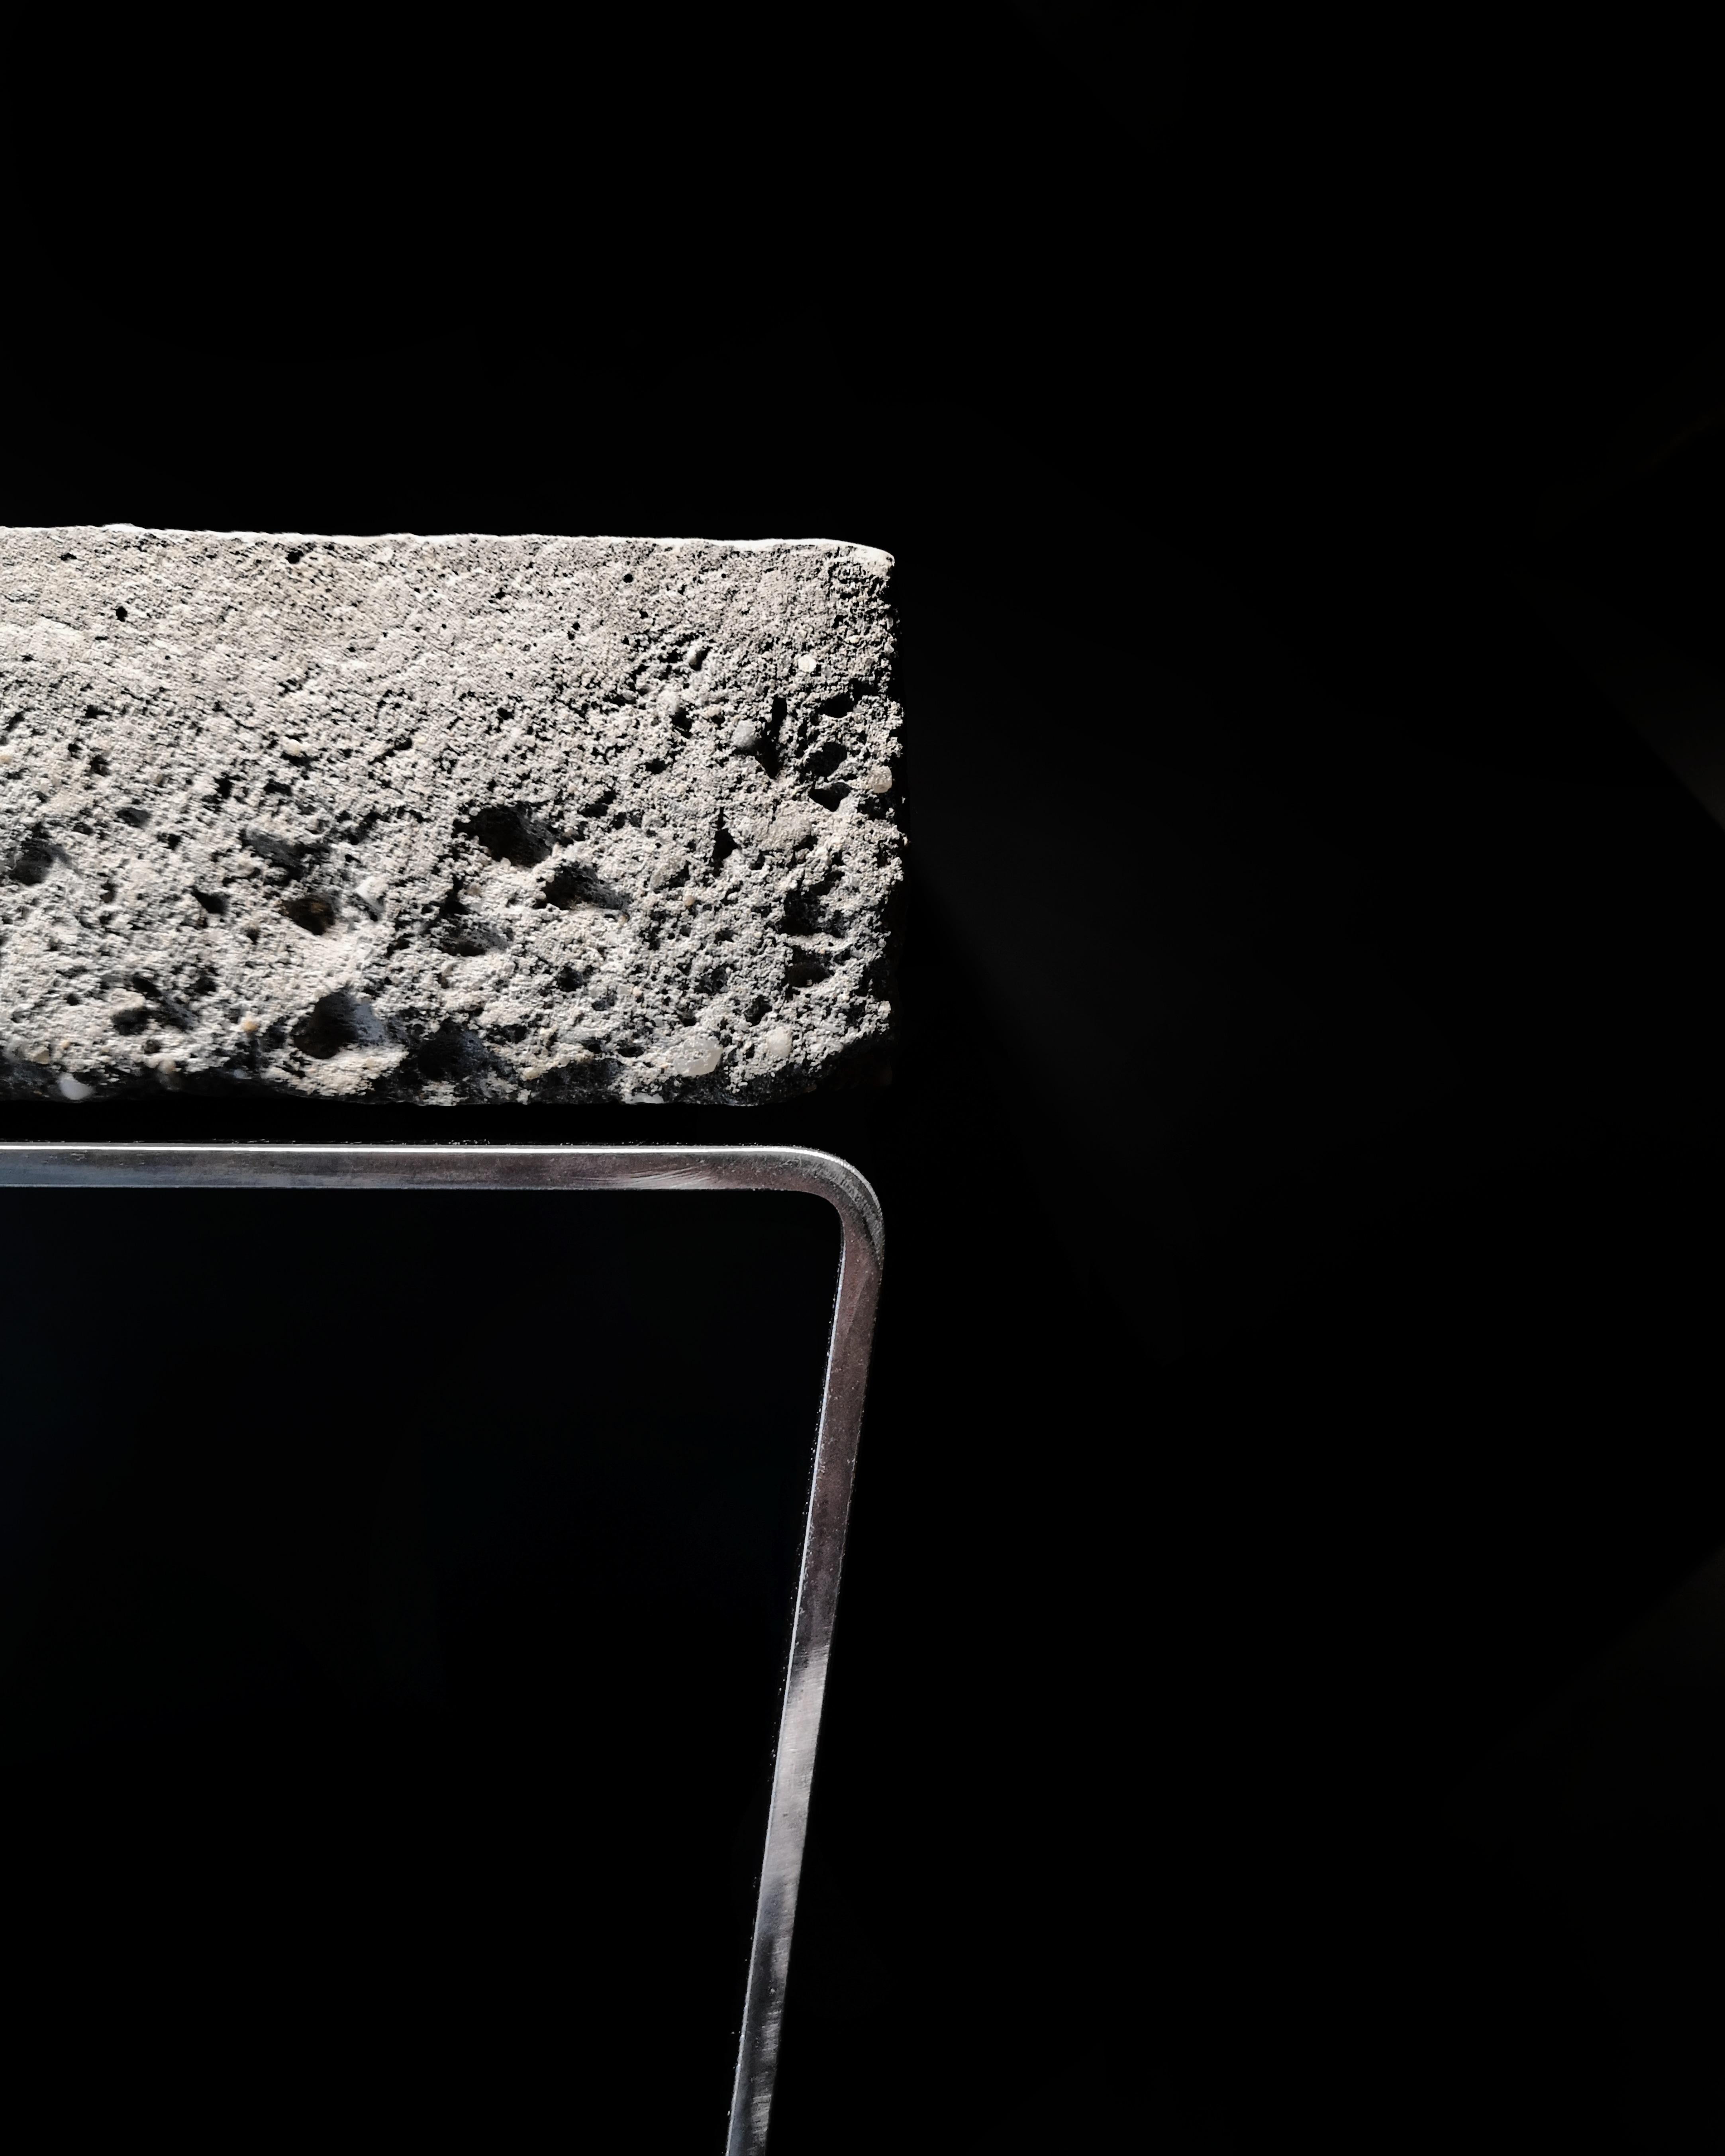 THE LINE CONCRETE Side Table is the latest version of the iconic table from the premier collection THE LINE created by Baker Street Boys' co-founder and designer, Tomasz Danielec.

It is the G-shaped table made of the combination of the hand crafted